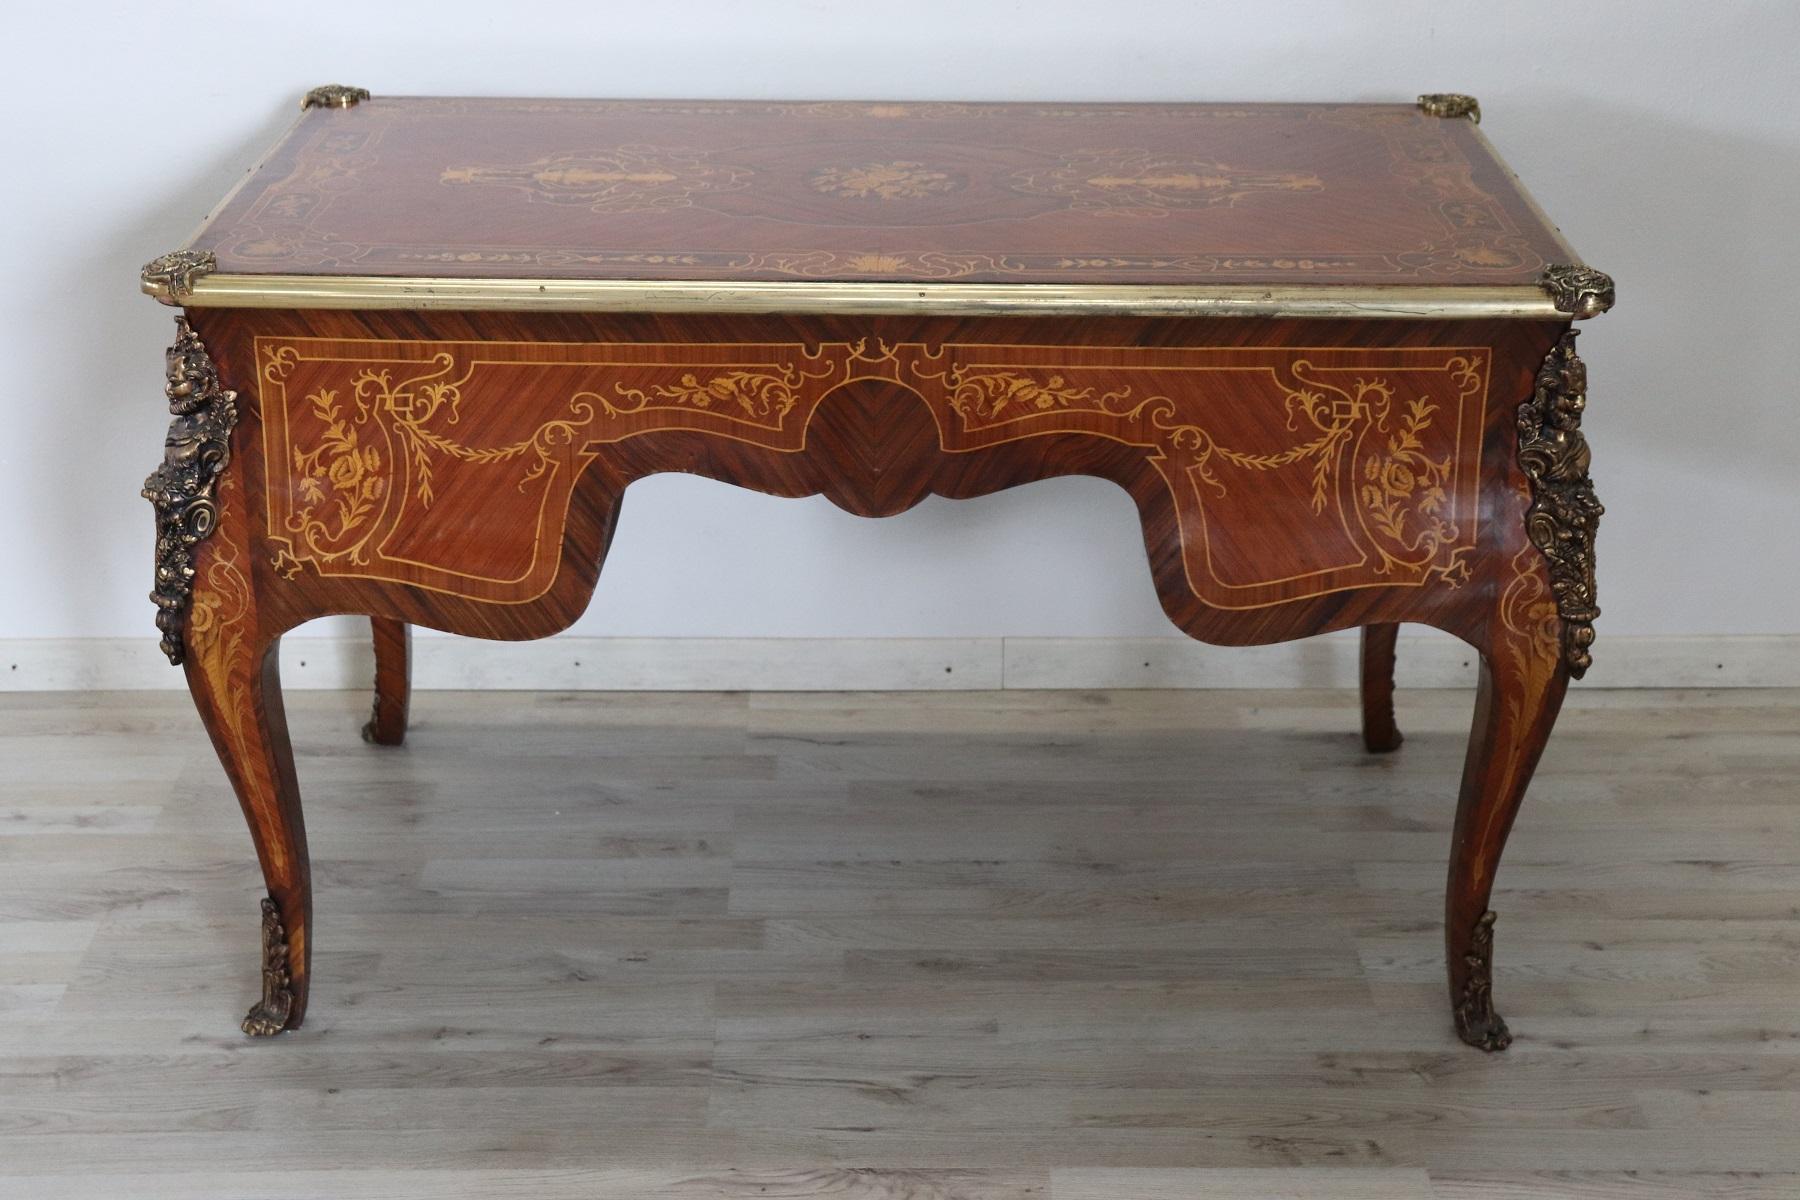 20th Century French Louis XV Style Wood Inlay Golden Bronzes Desk, Writing Table 5